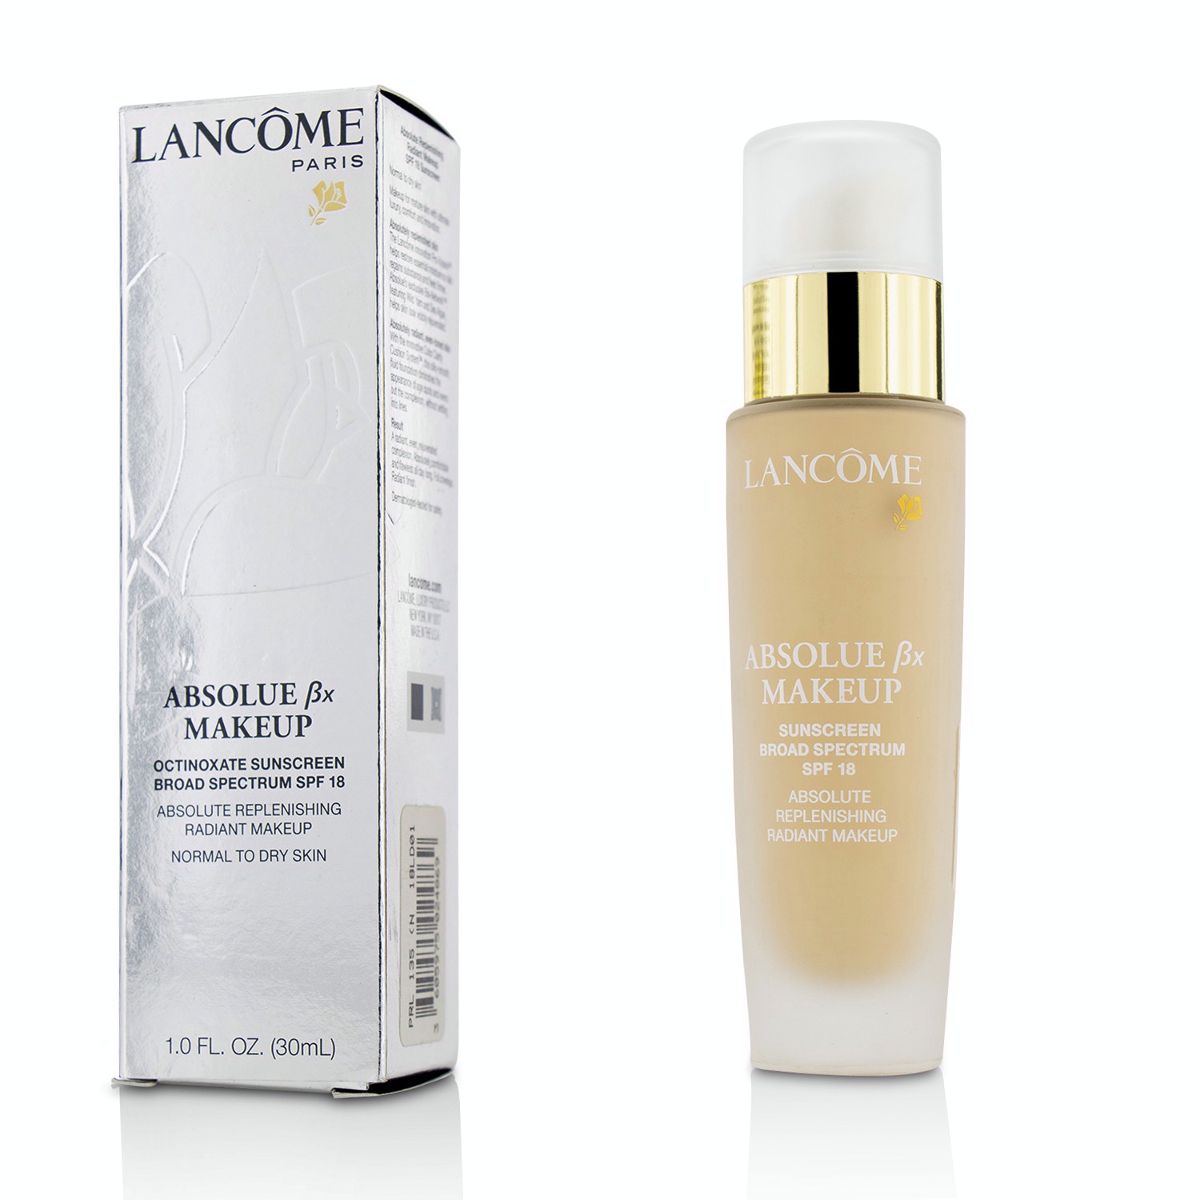 Absolue Bx Absolute Replenishing Radiant Makeup SPF 18 - # Absolute Pearl 135 NW (US Version) Lancome Image